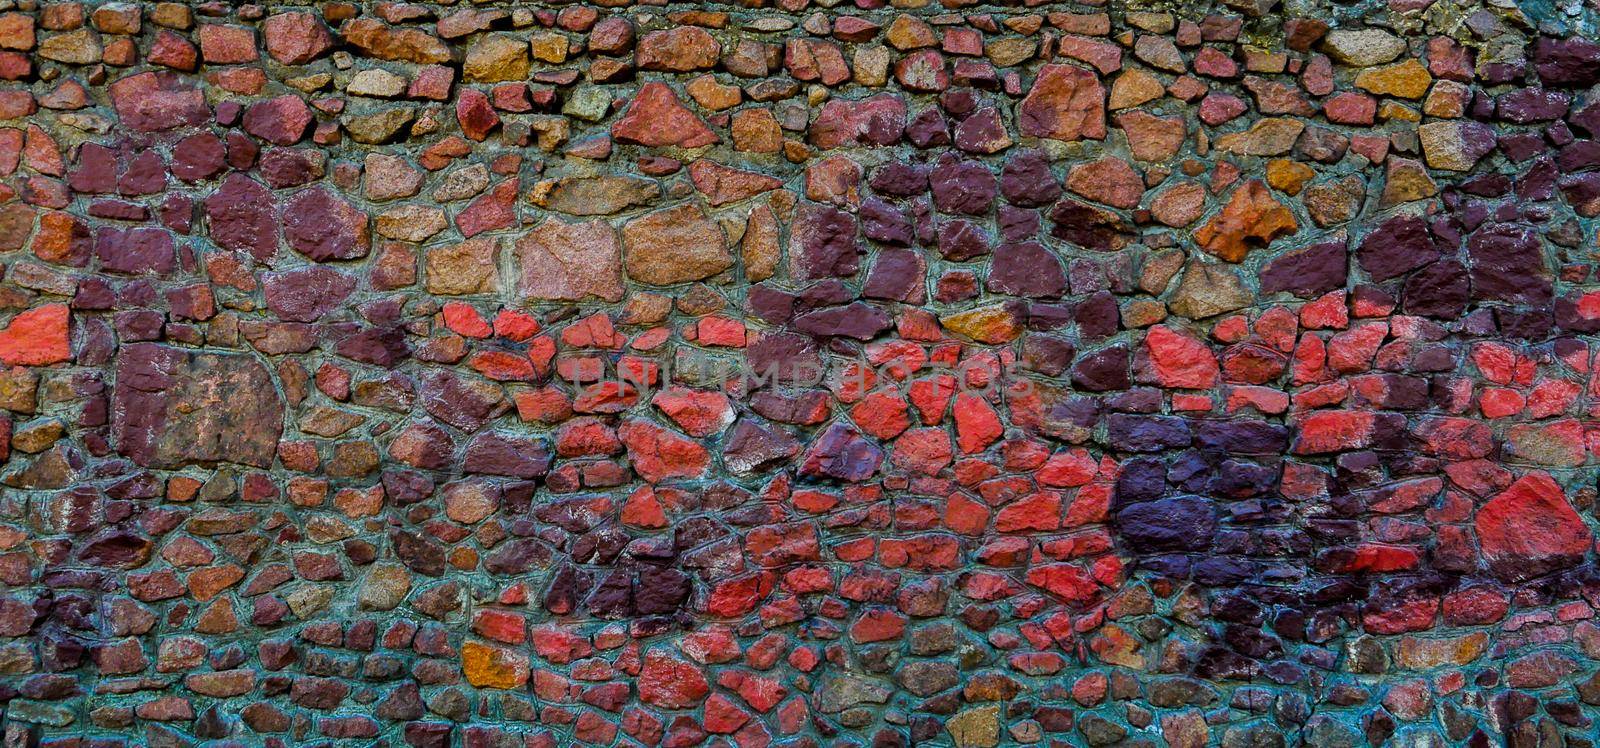 View of the wall of red, blue, brown, purple stones.